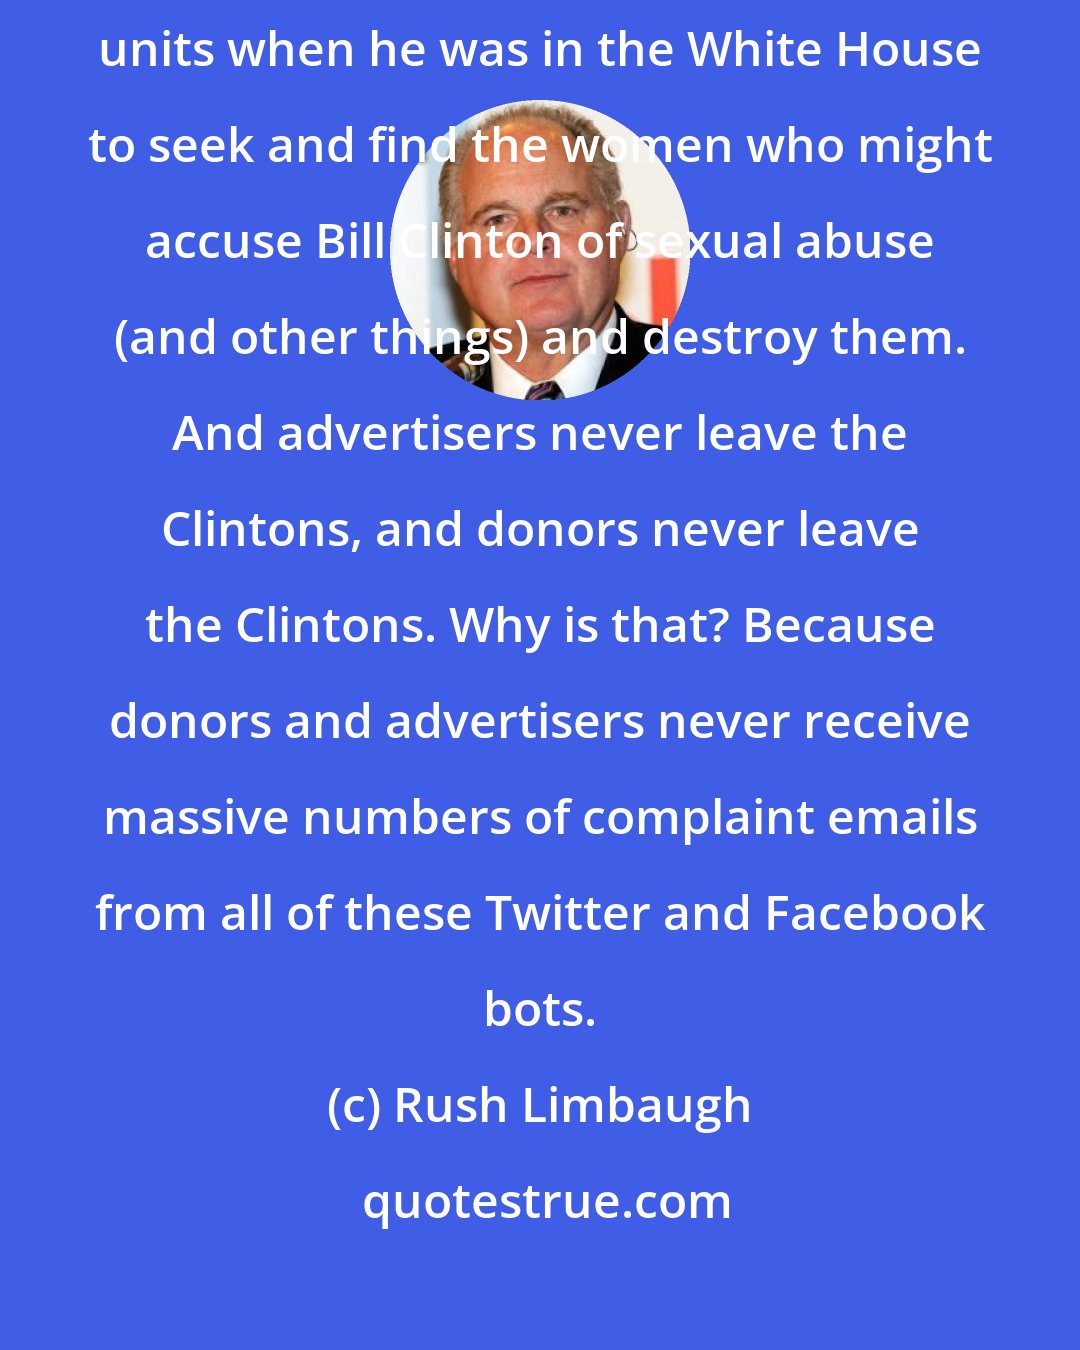 Rush Limbaugh: You talk about sexual abuse? Bill Clinton's wife ran the bimbo eruptions units when he was in the White House to seek and find the women who might accuse Bill Clinton of sexual abuse (and other things) and destroy them. And advertisers never leave the Clintons, and donors never leave the Clintons. Why is that? Because donors and advertisers never receive massive numbers of complaint emails from all of these Twitter and Facebook bots.